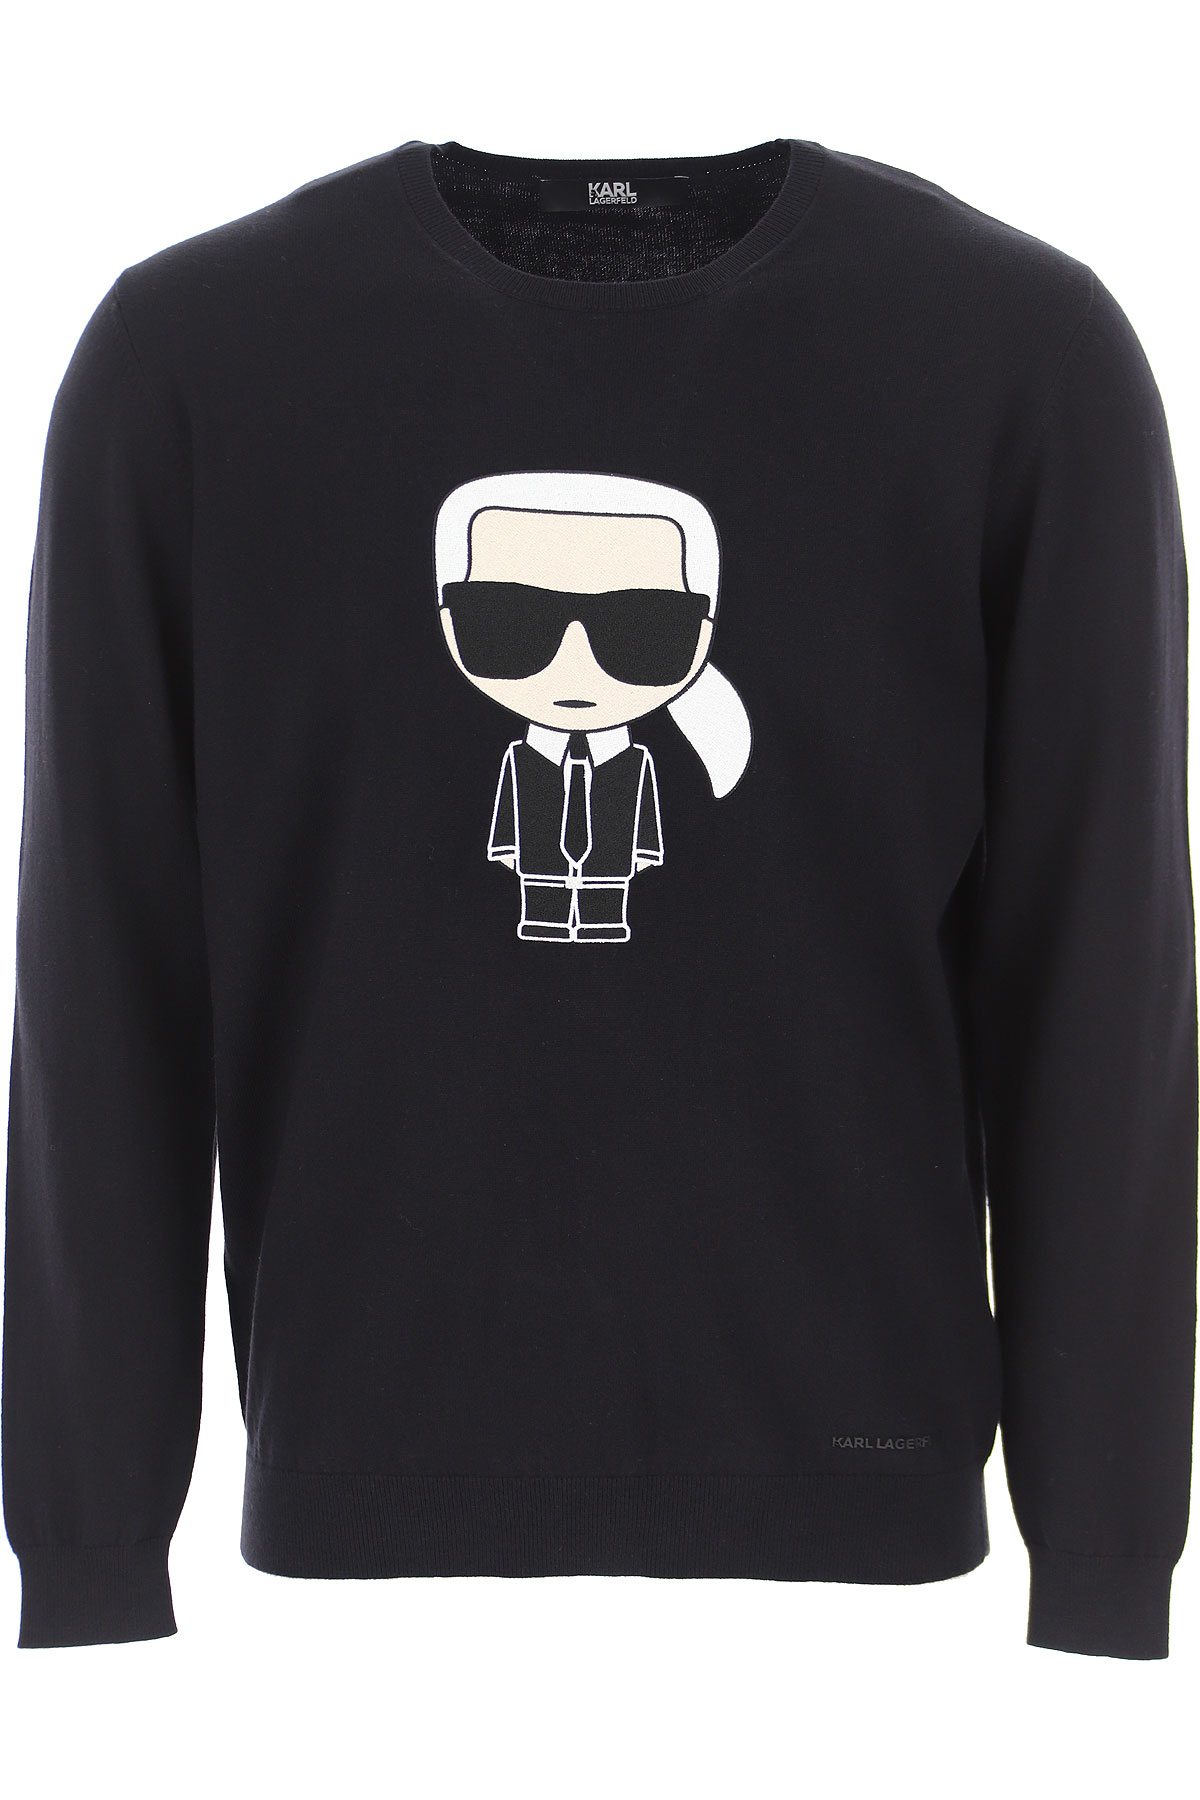 Mens Clothing Karl Lagerfeld, Style code: 655030-502305-990